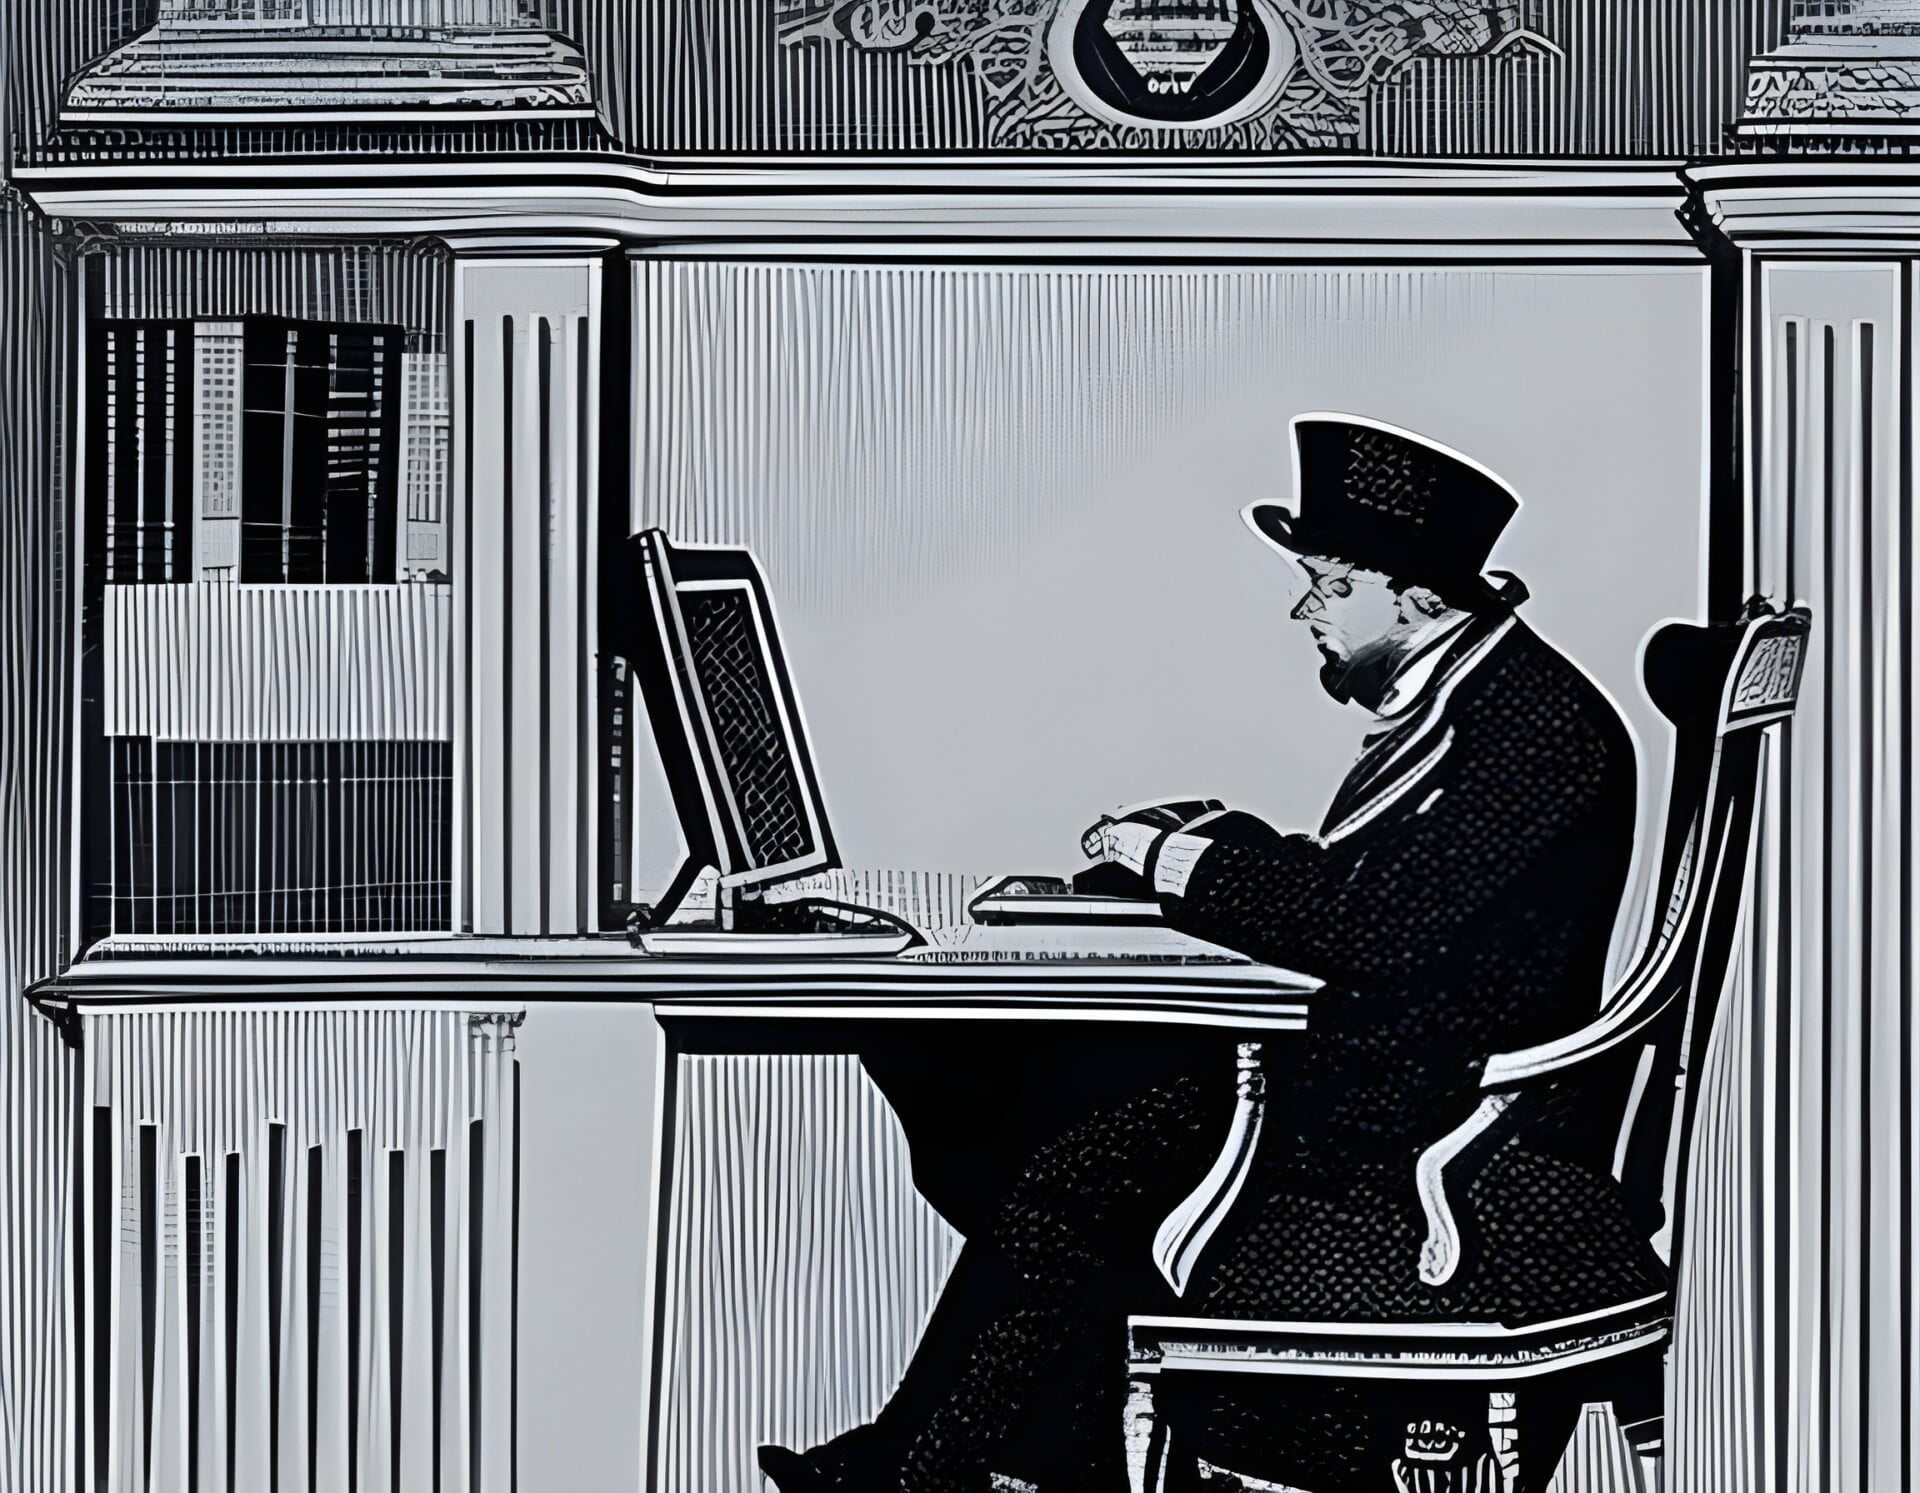 An ai-generated image. The style is an etching. A victorian era man is sitting at a table typing on a computer. He is wearing a top hat and suit. The chair is a high-back wooden chair. There is a bookshelf in front of him.